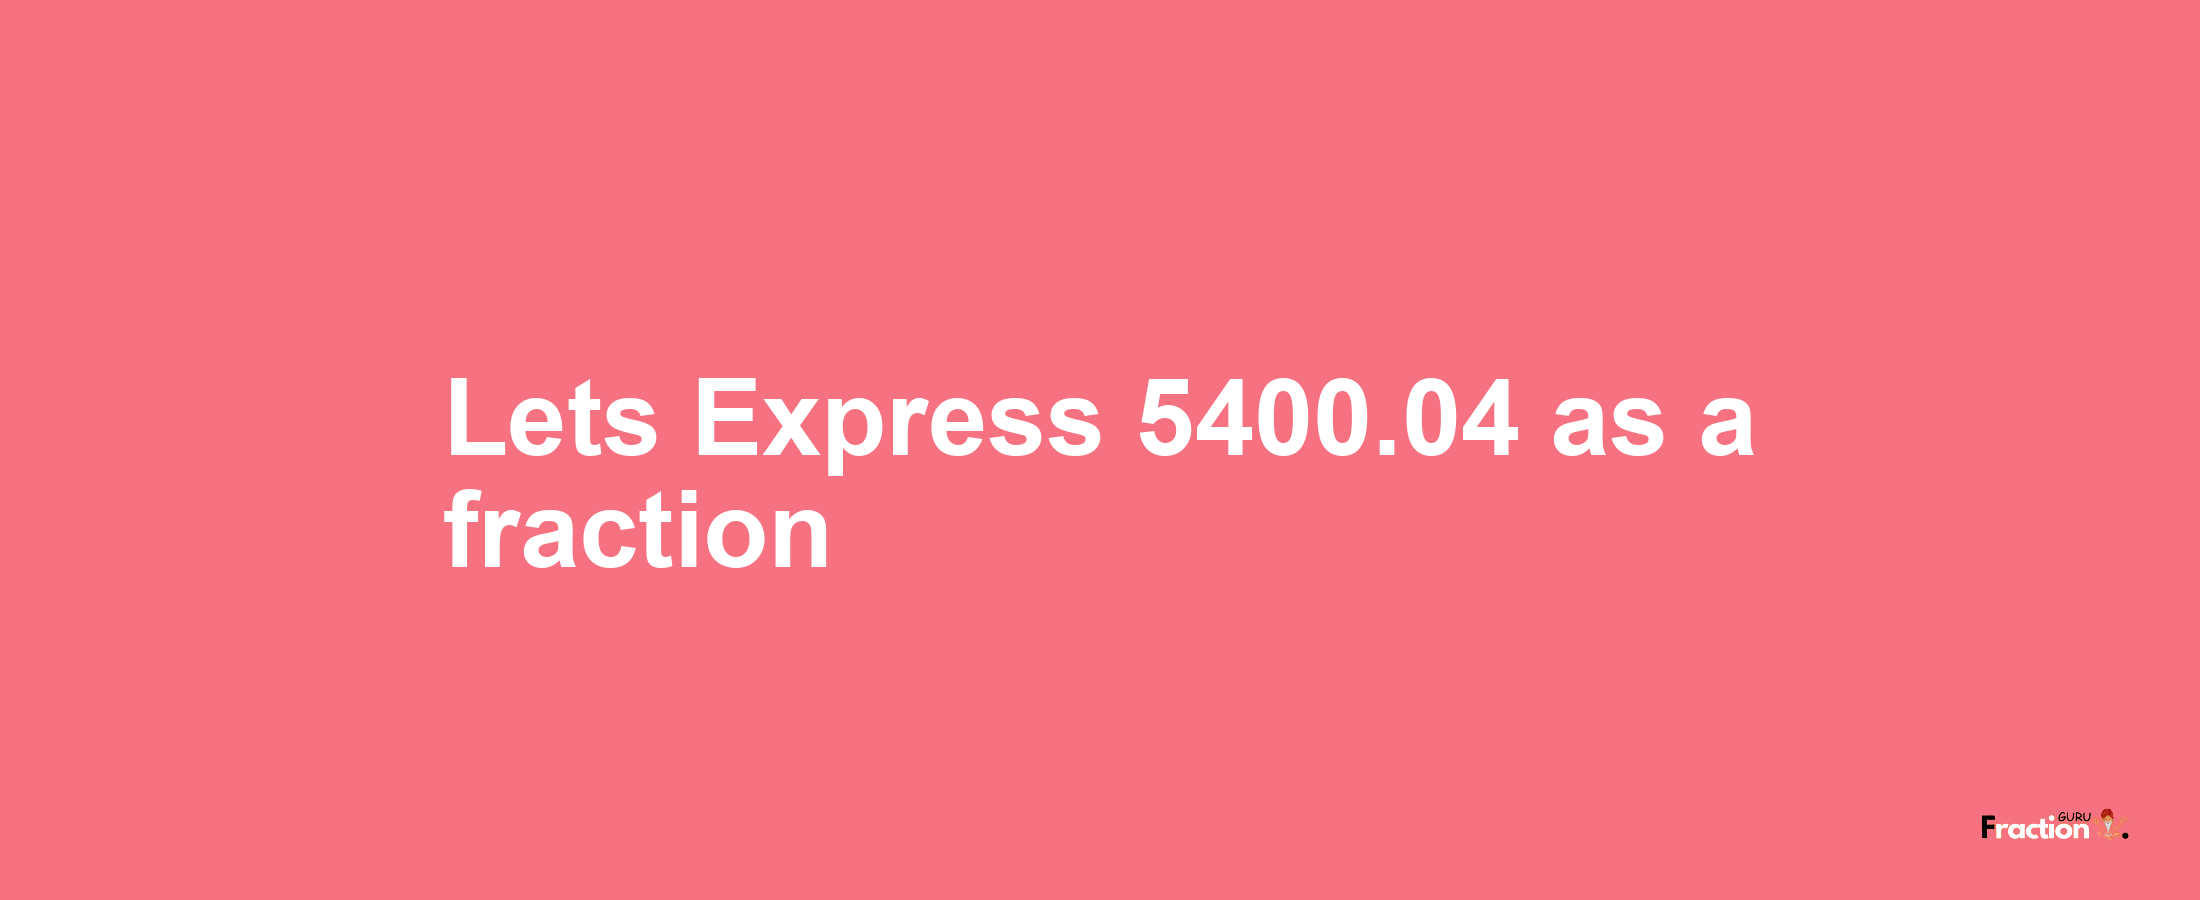 Lets Express 5400.04 as afraction